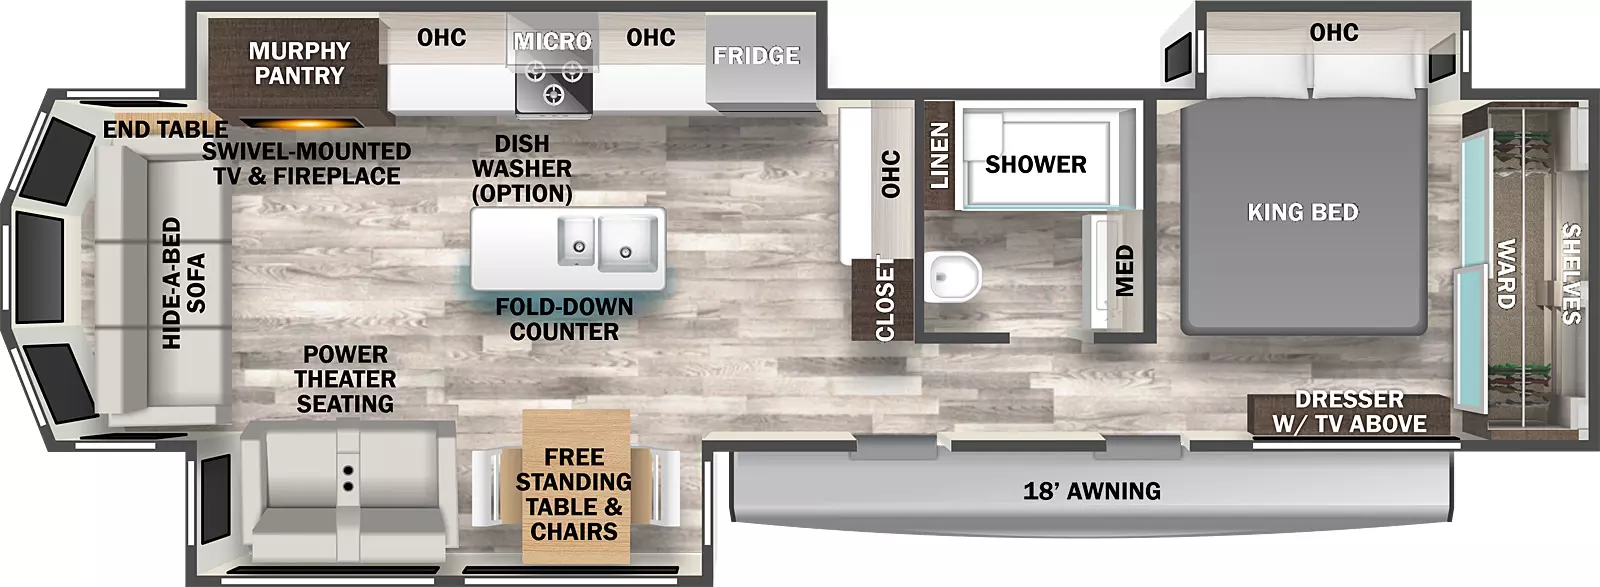 The 40CCK has three slideouts and two entries. Exterior features include an 18 foot awning. Interior layout front to back: front bedroom with wardrobe with shelves, off-door side king bed slideout with overhead cabinets, dresser with TV above, and step entry; off-door side full bathroom with medicine cabinet and linen closet; interior wall with closet, countertop and overhead cabinets; sliding glass door entry; off-door side slideout with refrigerator, microwave, stove, overhead cabinets, and murphy pantry behind swivel mounted TV and fireplace; kitchen island with sink and fold-down counter (dish washer optional); door side slideout with free-standing table and chairs and power theater seating; hide-a-bed sofa with end table in rear alcove with windows;      